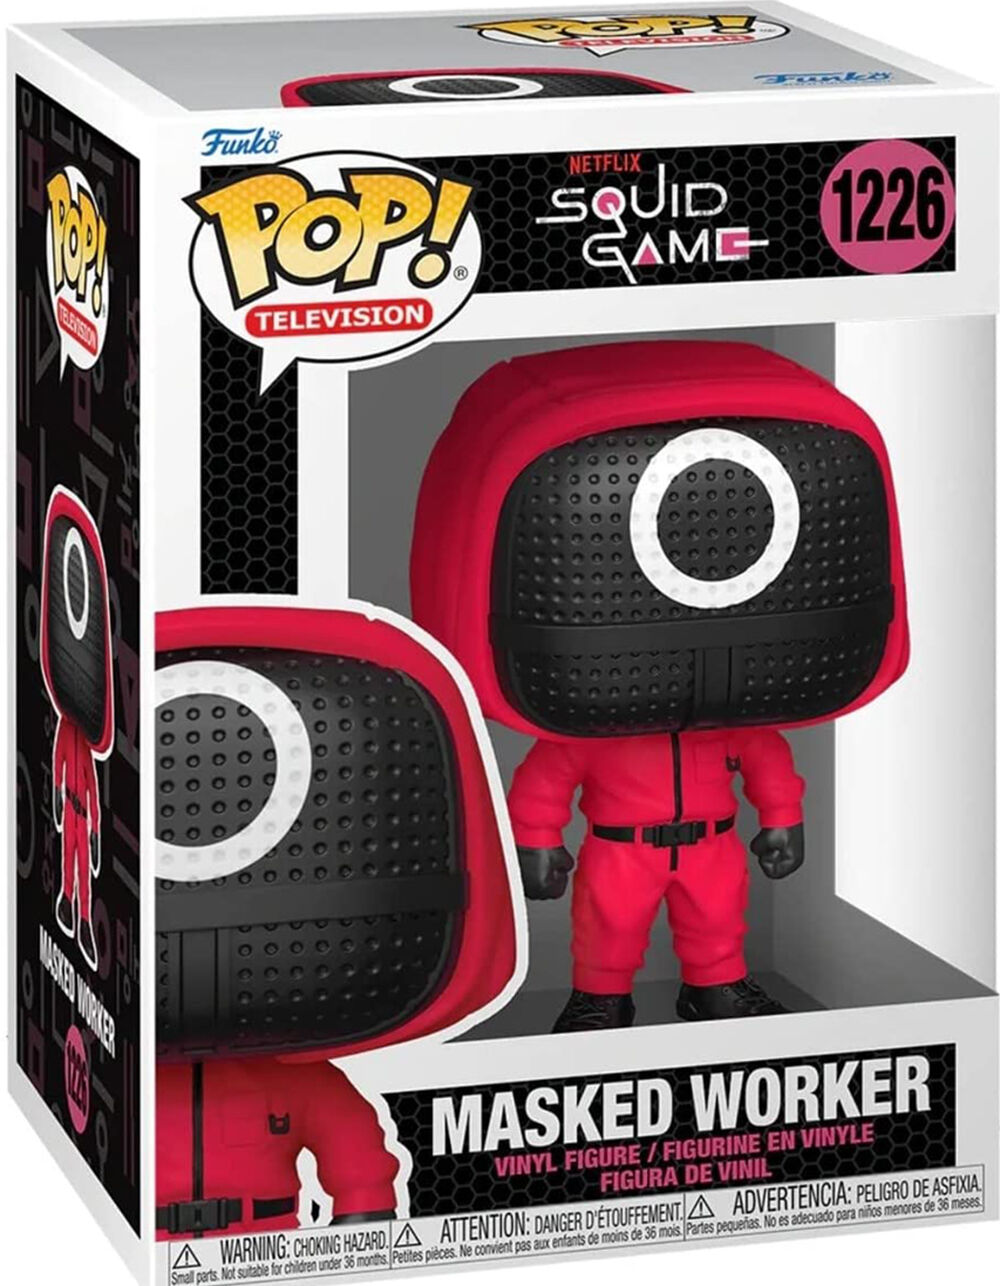 Masked Worker Funko Pop Squid Game 1226 W/ Protector